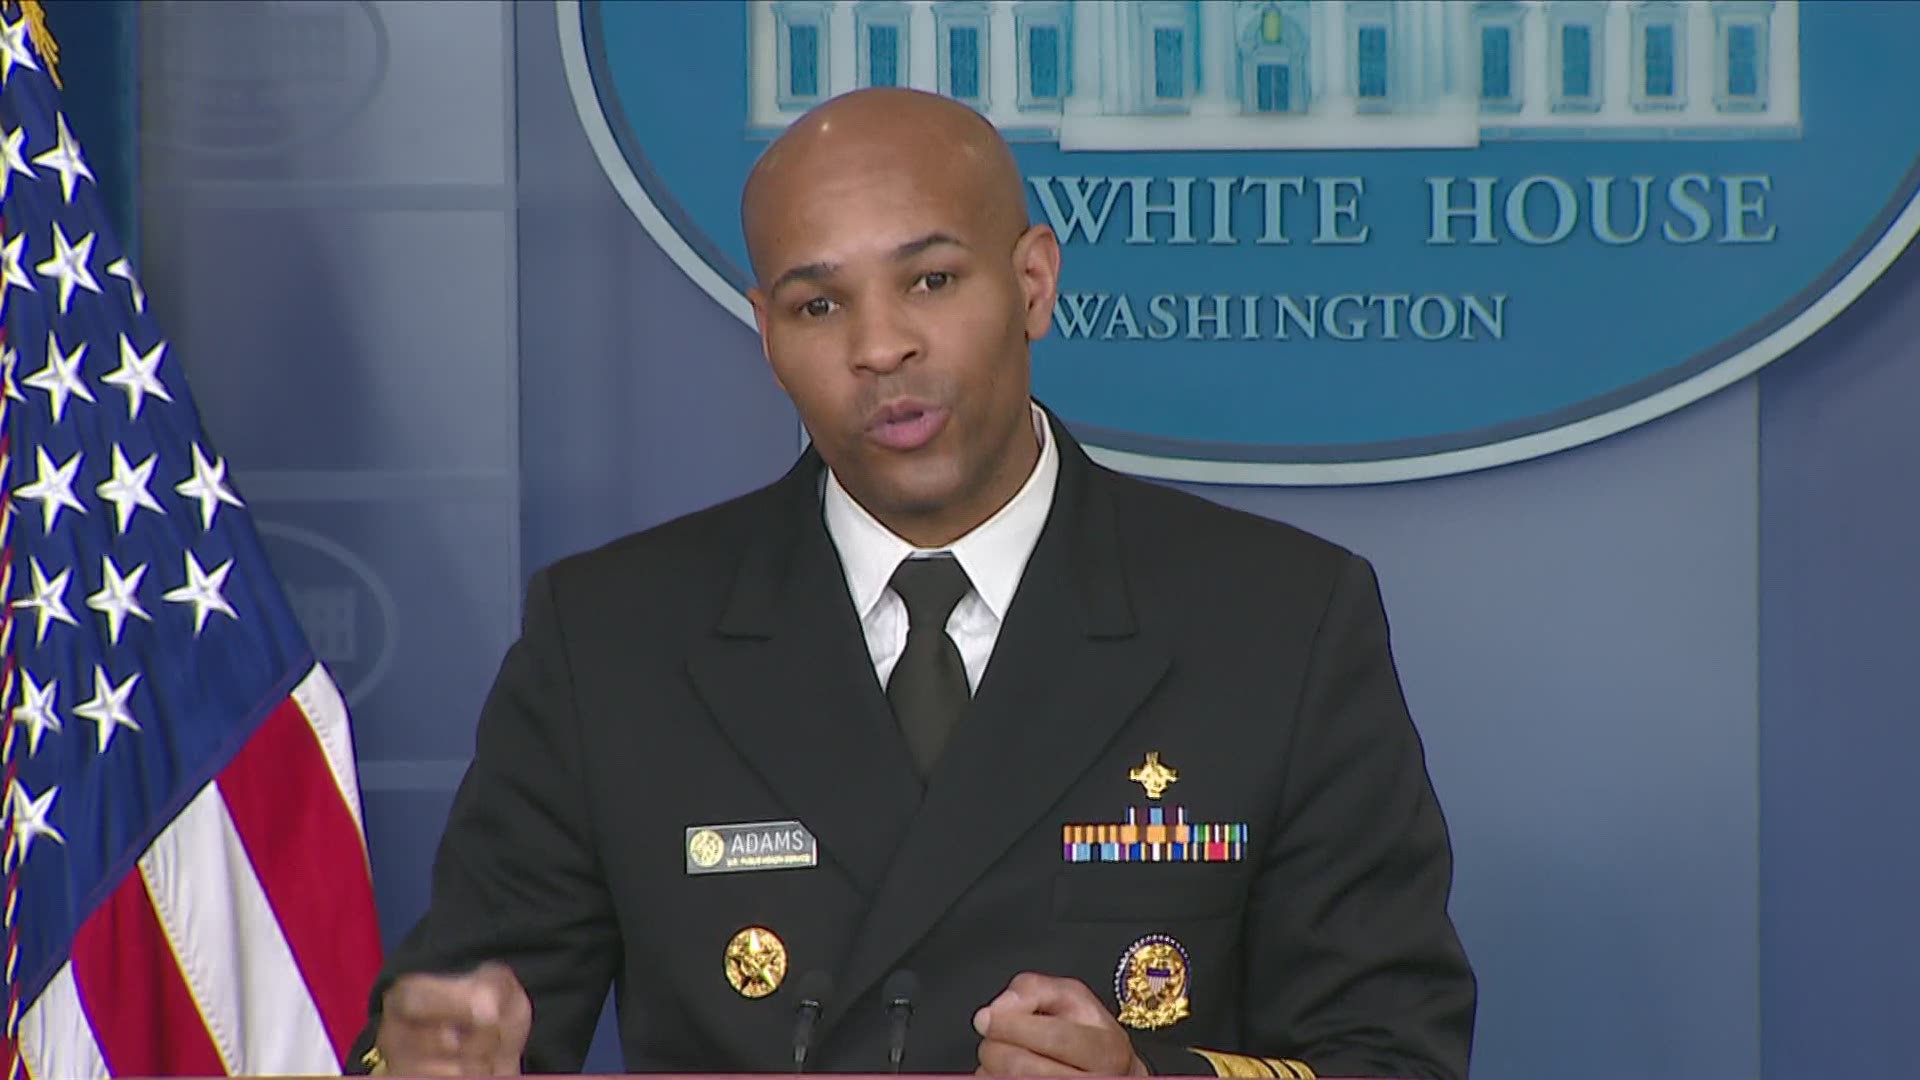 The Surgeon General discusses the changing recommendation on wearing masks.